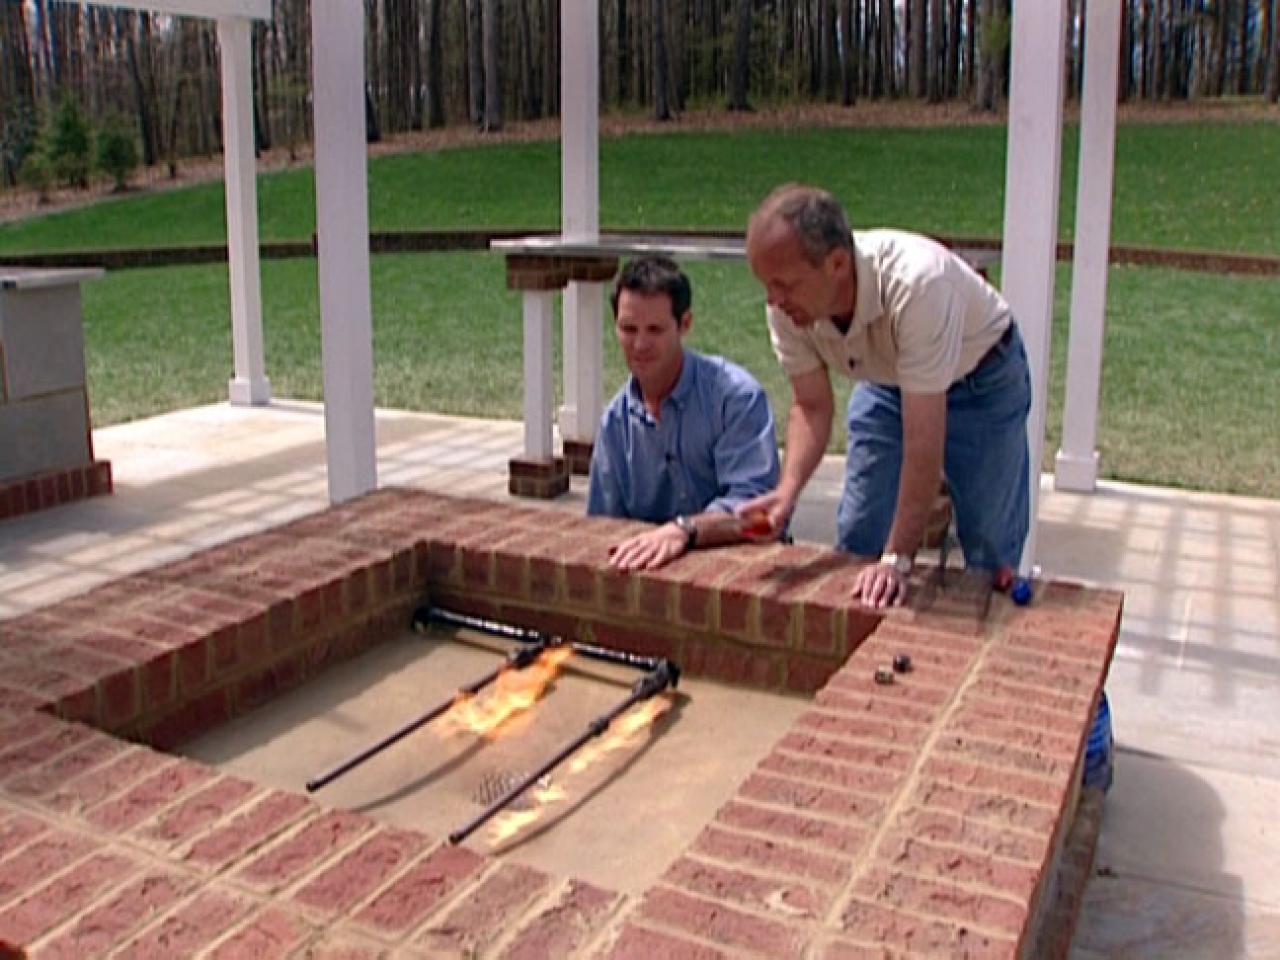 How To Hook Up The Gas For A Fire Pit, How To Build A Outdoor Gas Fire Pit